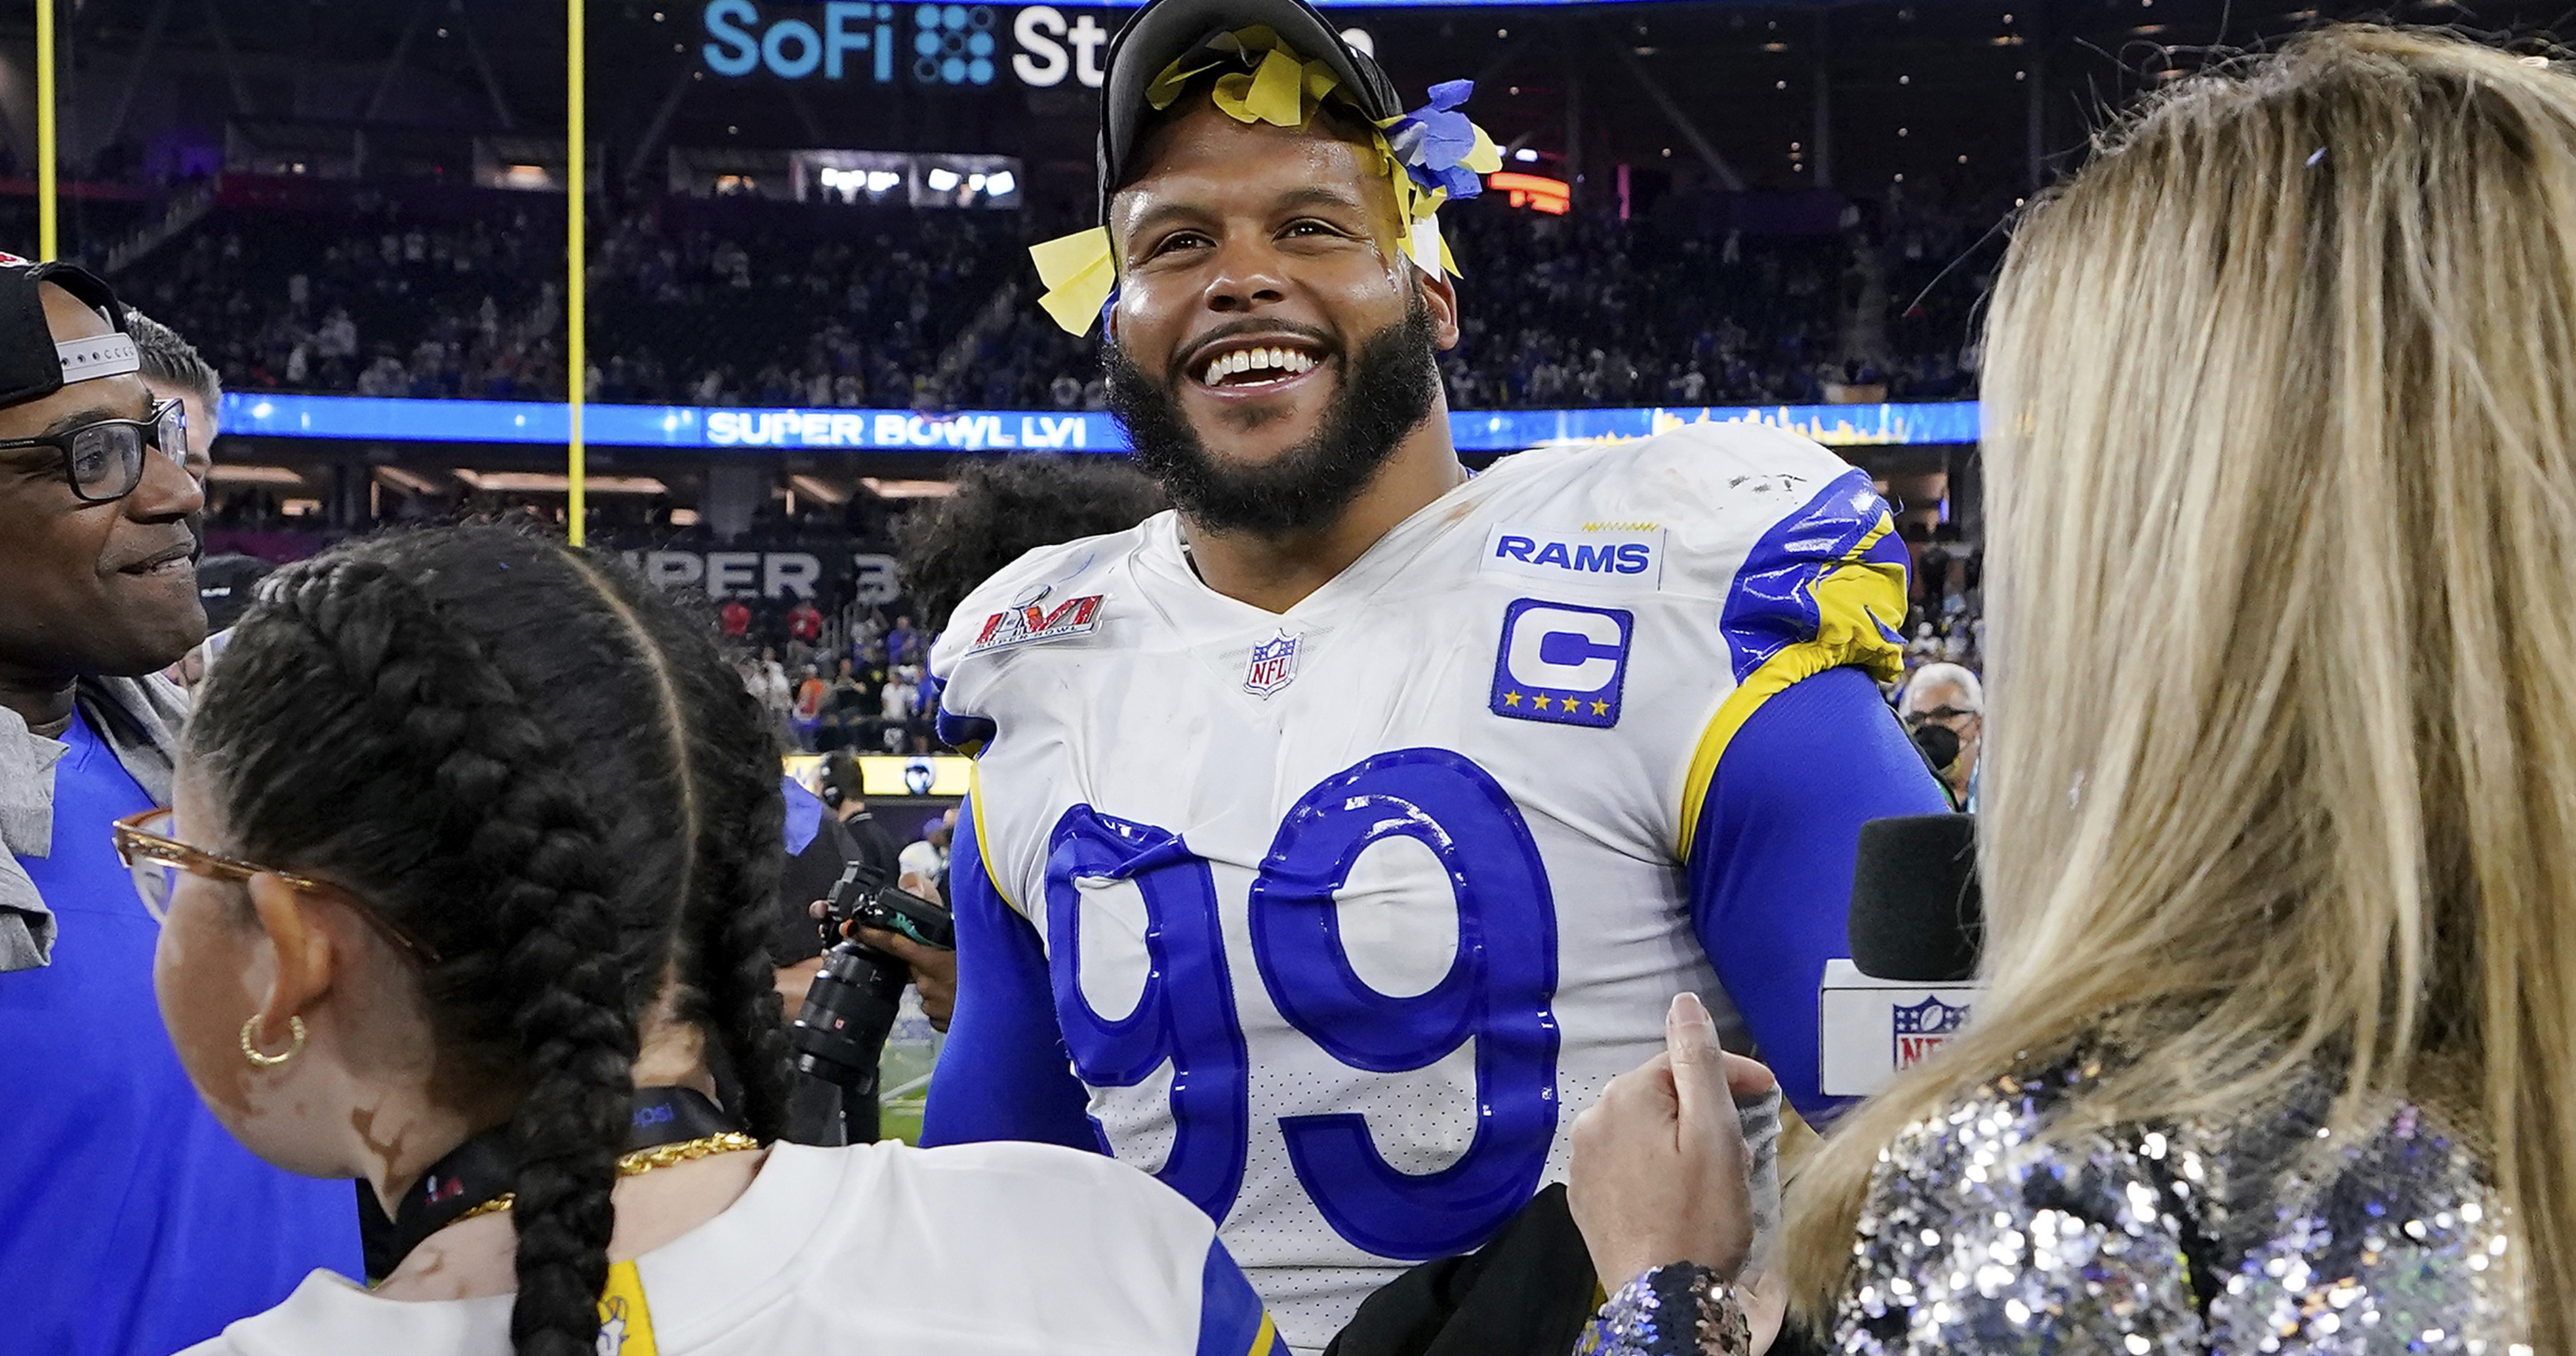 Rams Parade 2022: Date, Route, Expectations After Super Bowl Win, News,  Scores, Highlights, Stats, and Rumors